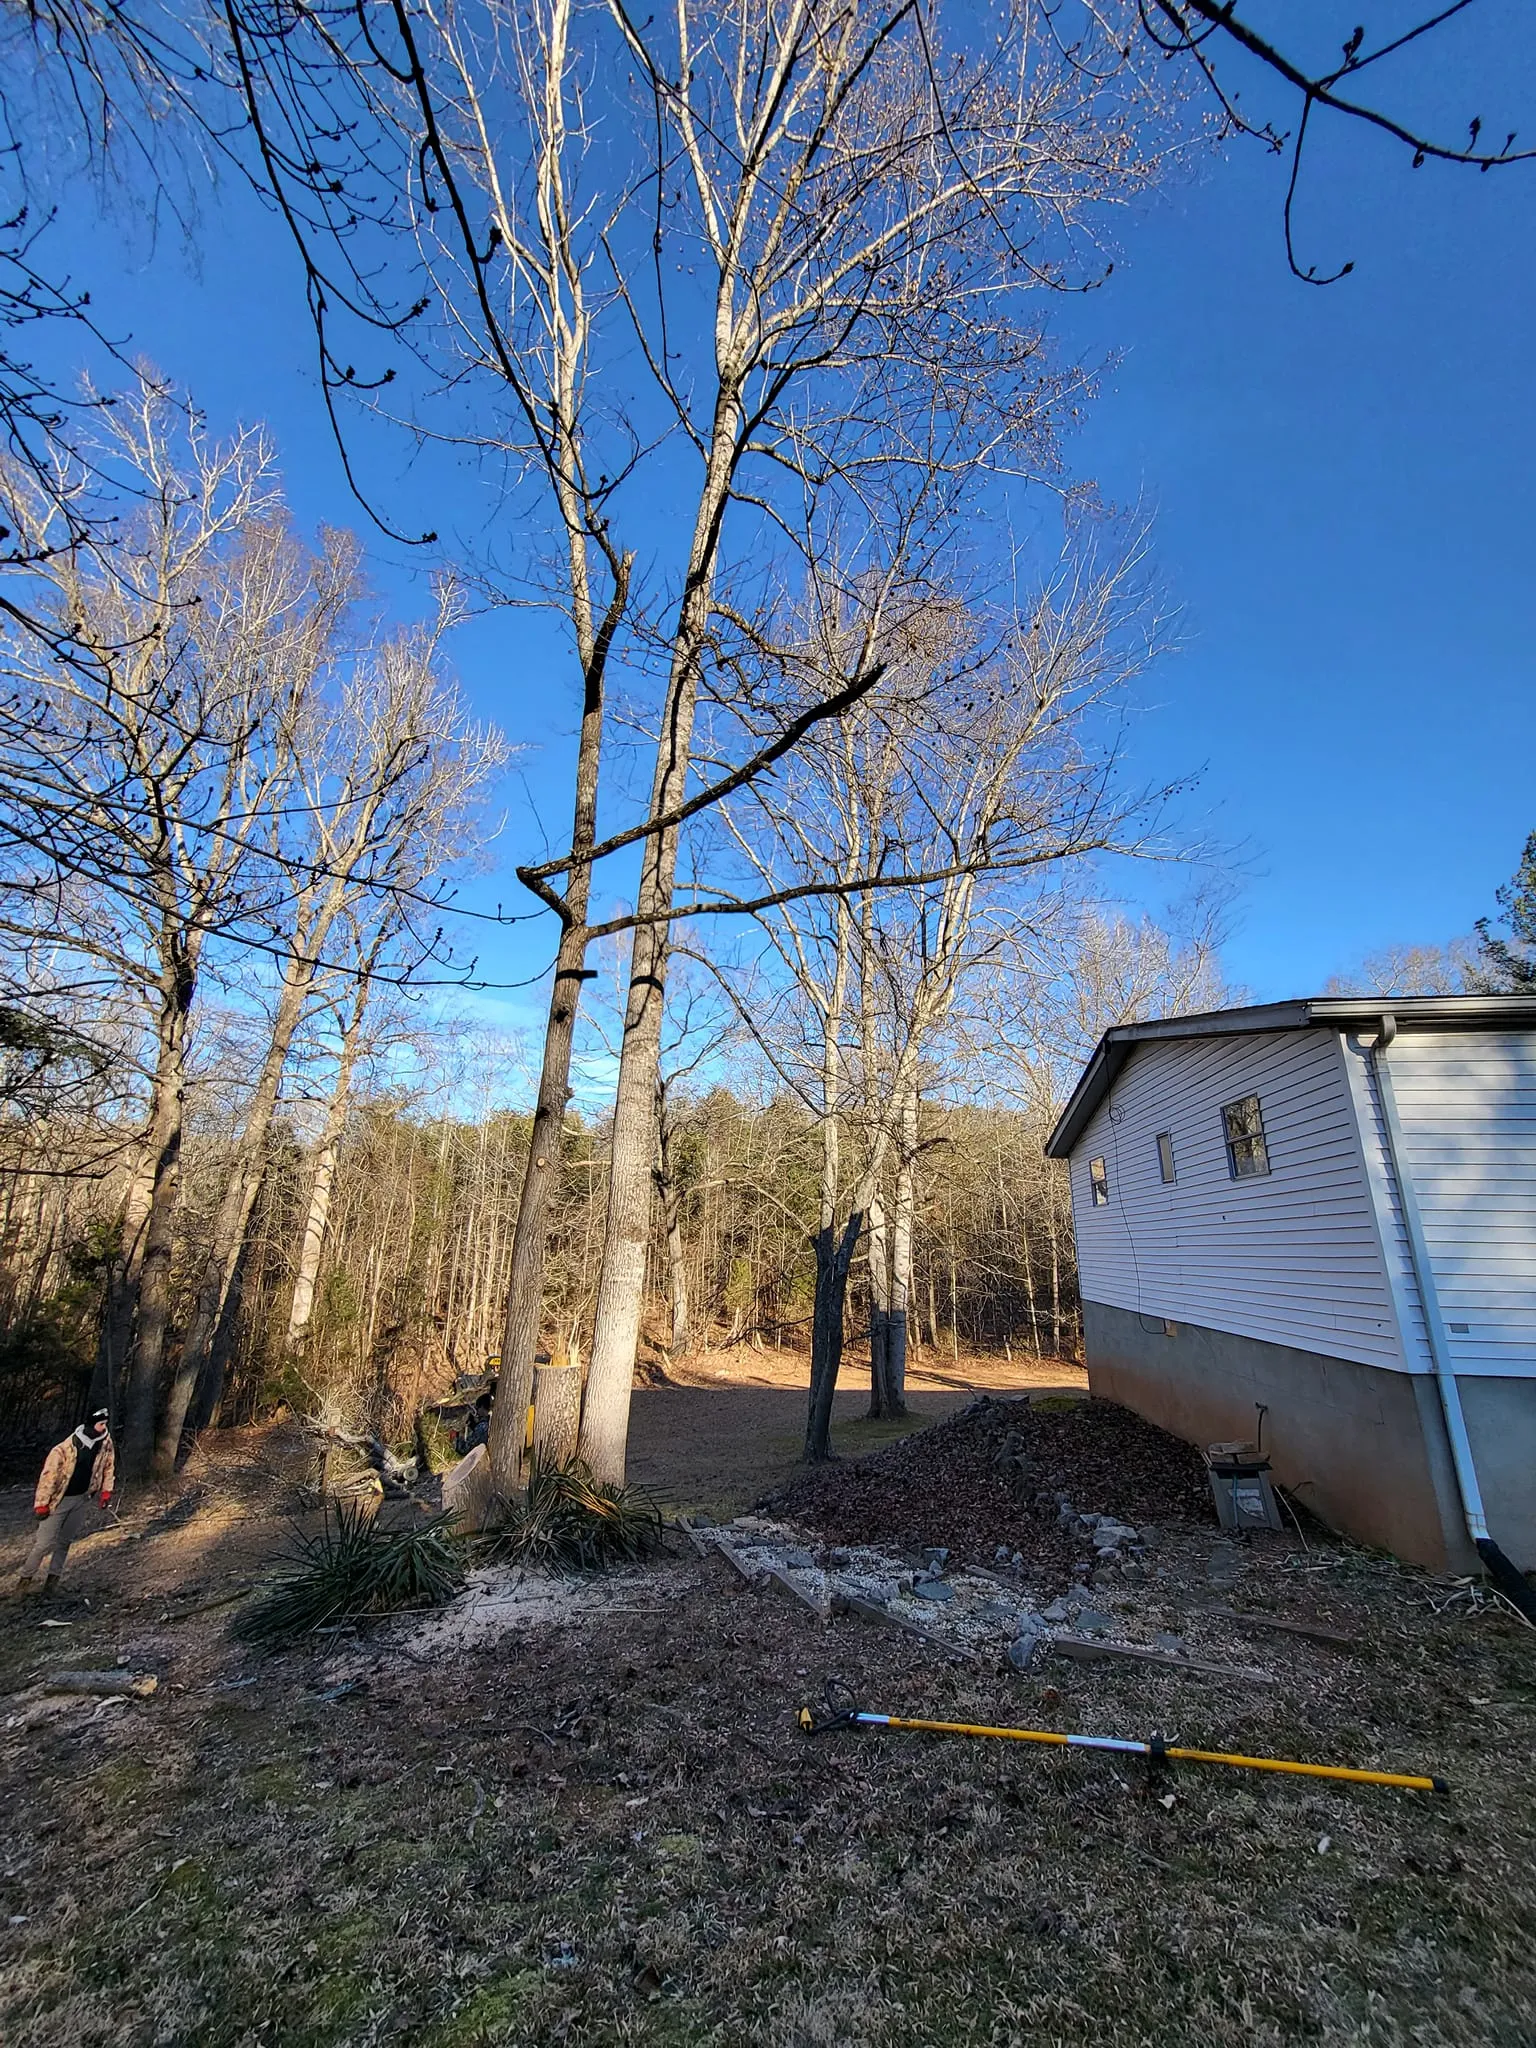 Tree Trimming for Smitty's Tree Service in Ringgold, VA